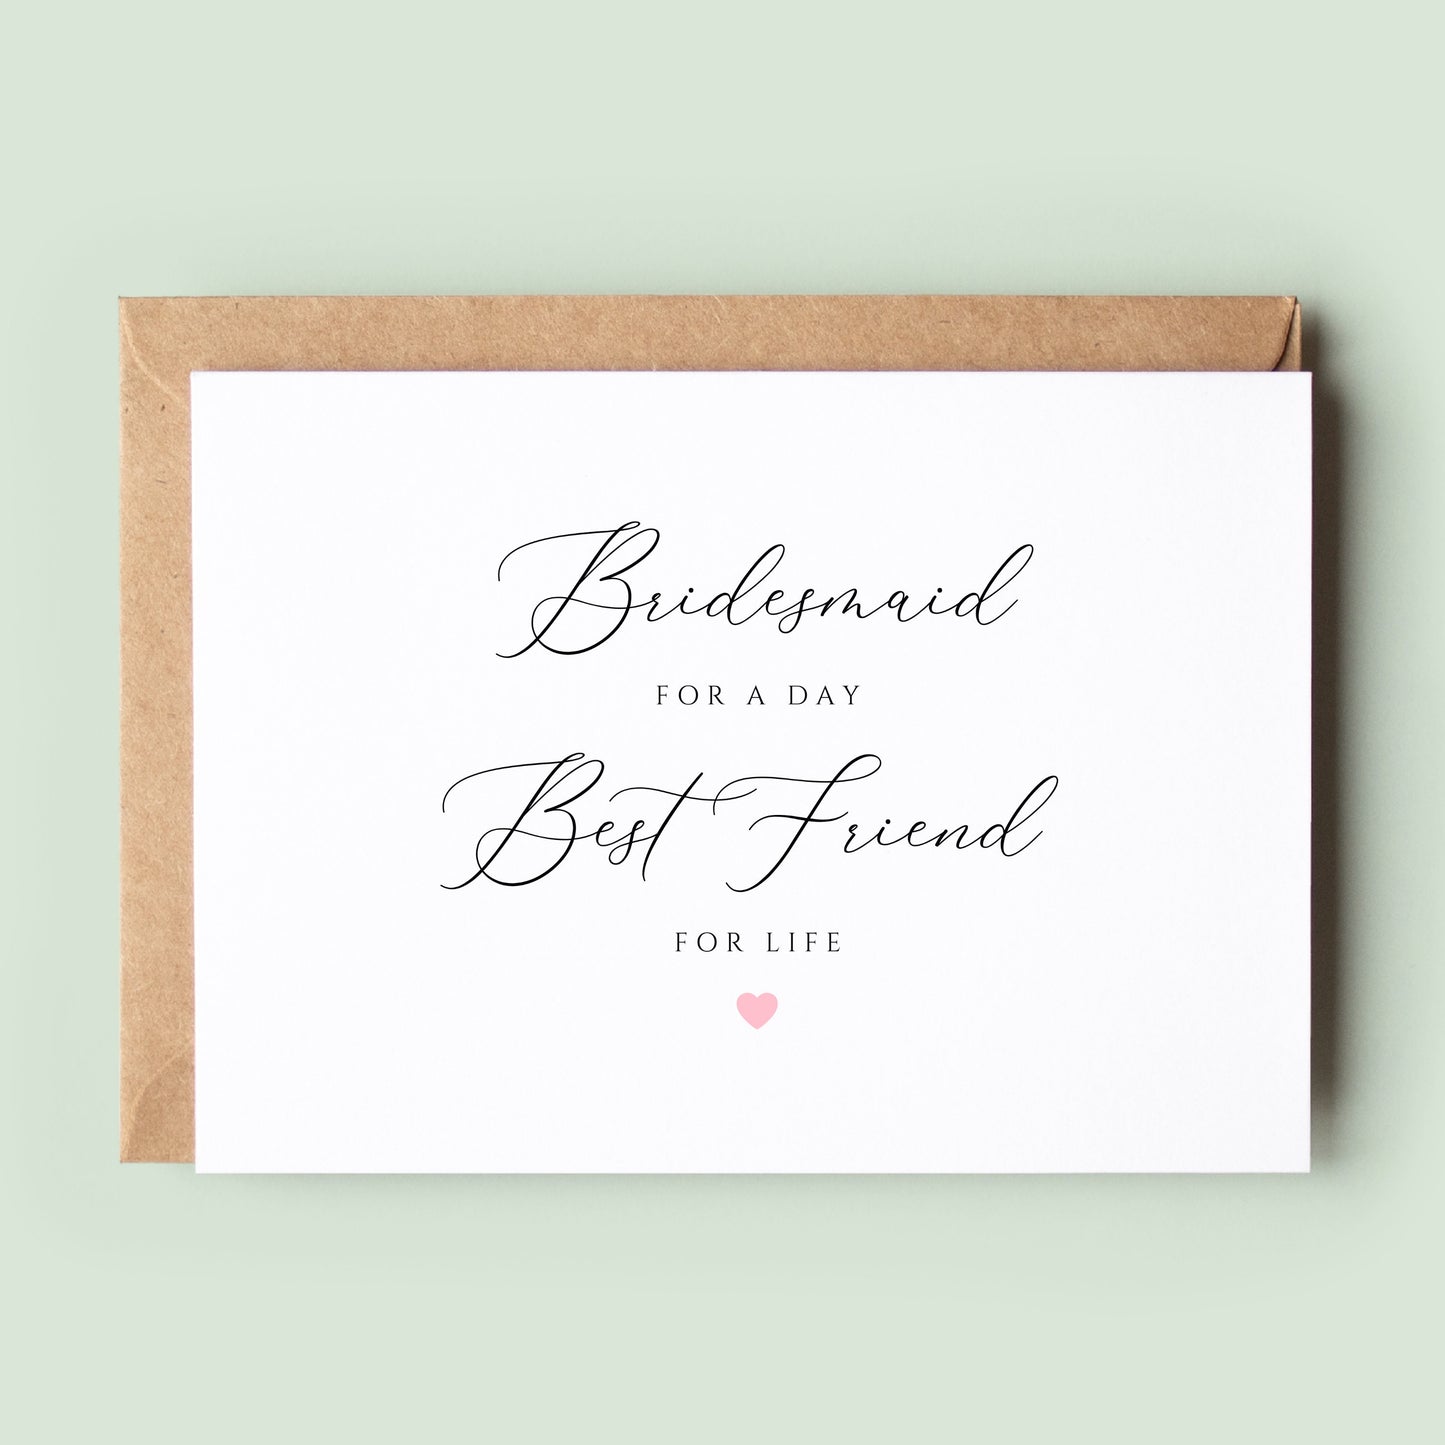 Matron of Honor for a Day, Best Friend for Life, Will You Be My Matron of Honor, Matron of Honor Proposal Card, Matron of Honor Proposal Box